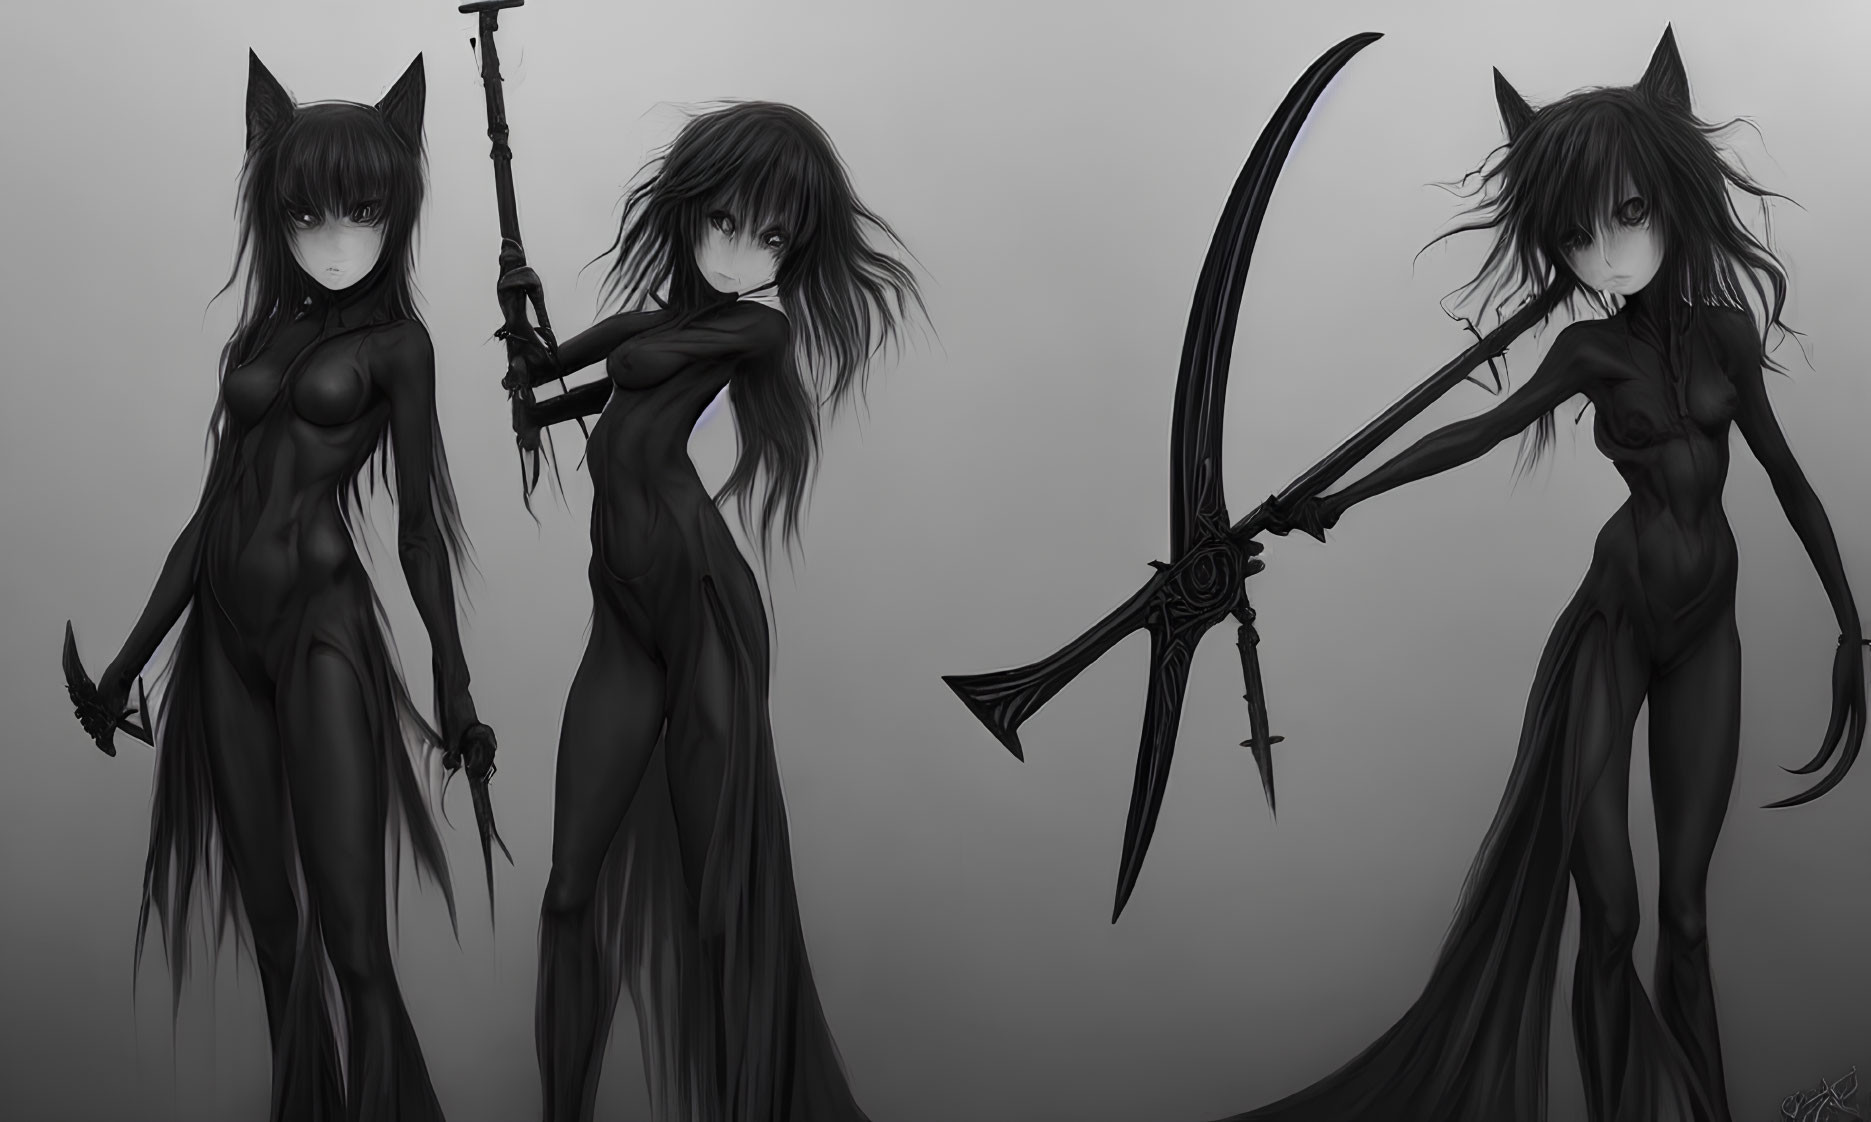 Monochrome anime-style female figures with feline traits and weapons on dark background